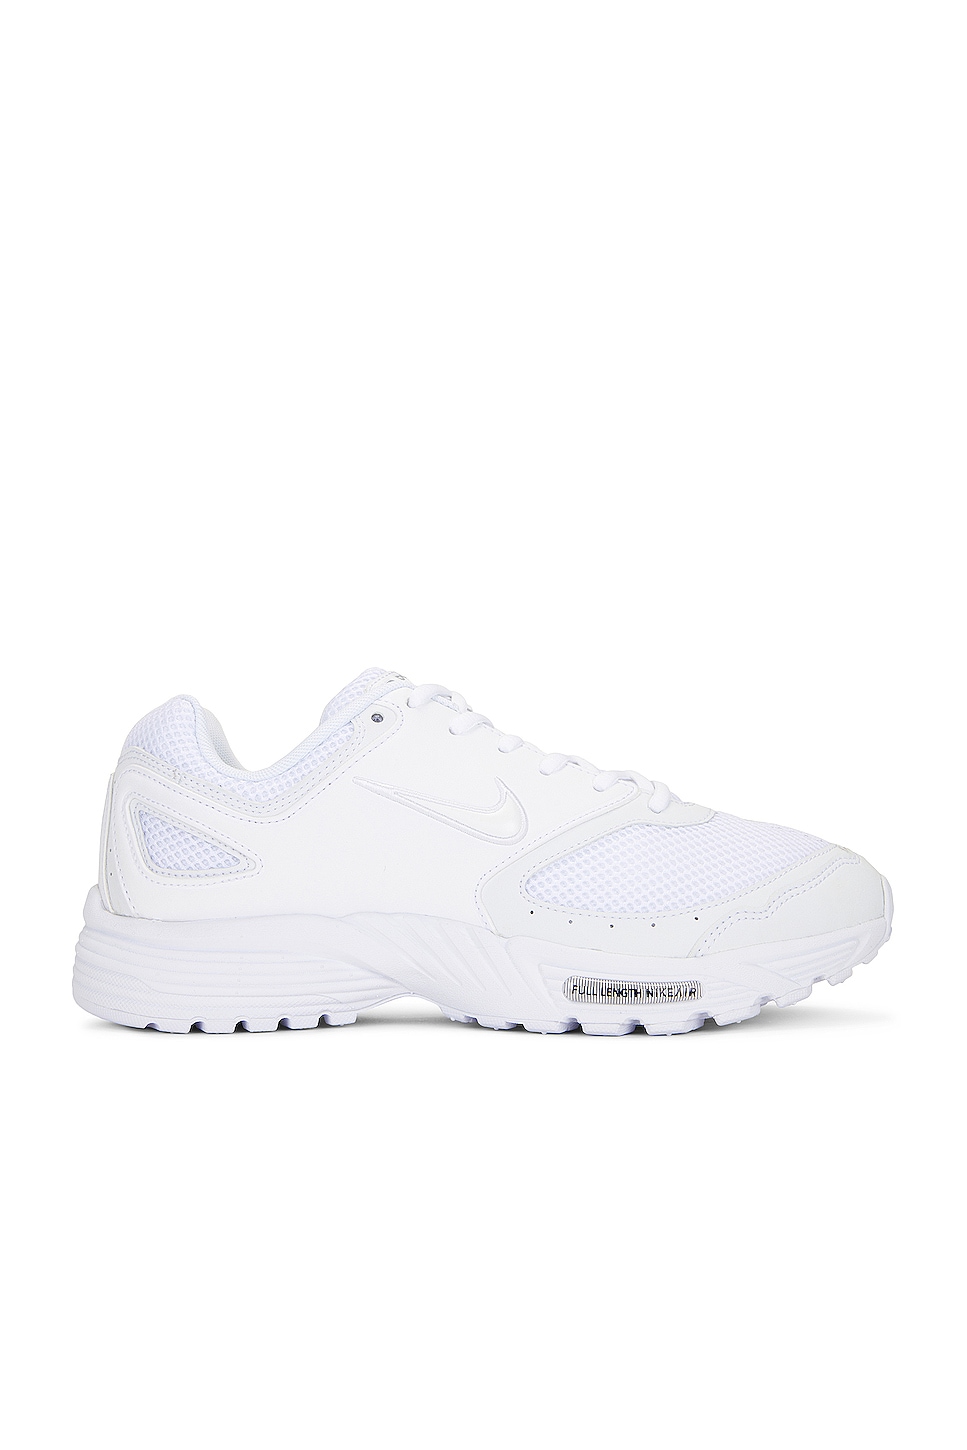 Image 1 of COMME des GARCONS Homme Plus X Nike Air Pegasus 2005 Sneaker in White